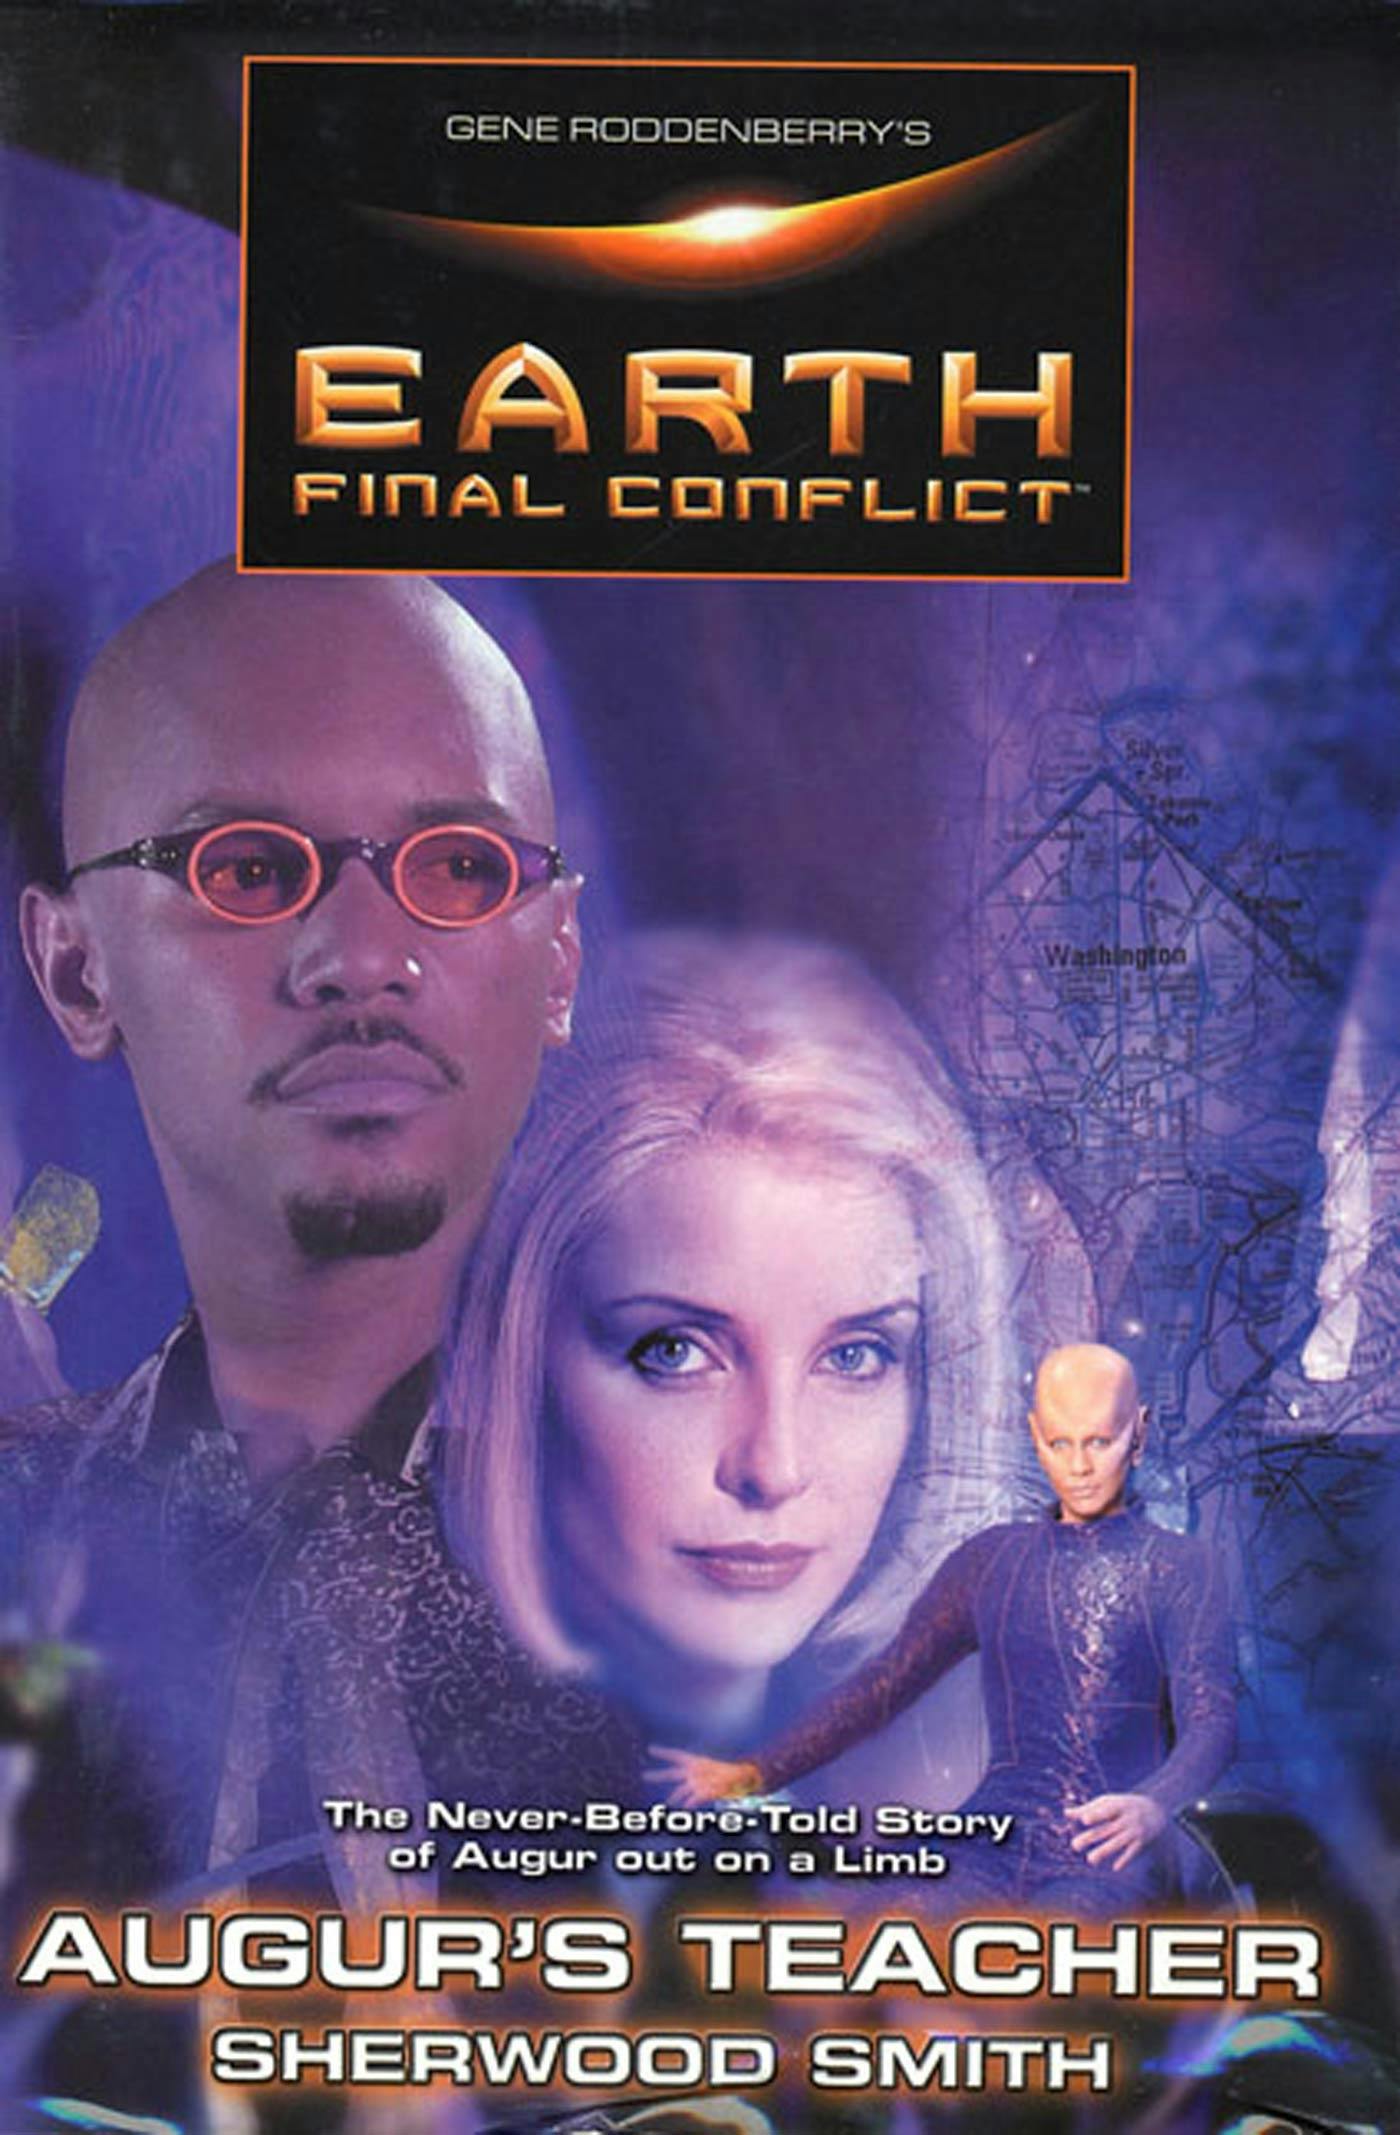 Cover for the book titled as: Gene Roddenberry's Earth: Final Conflict--Auger's Teacher